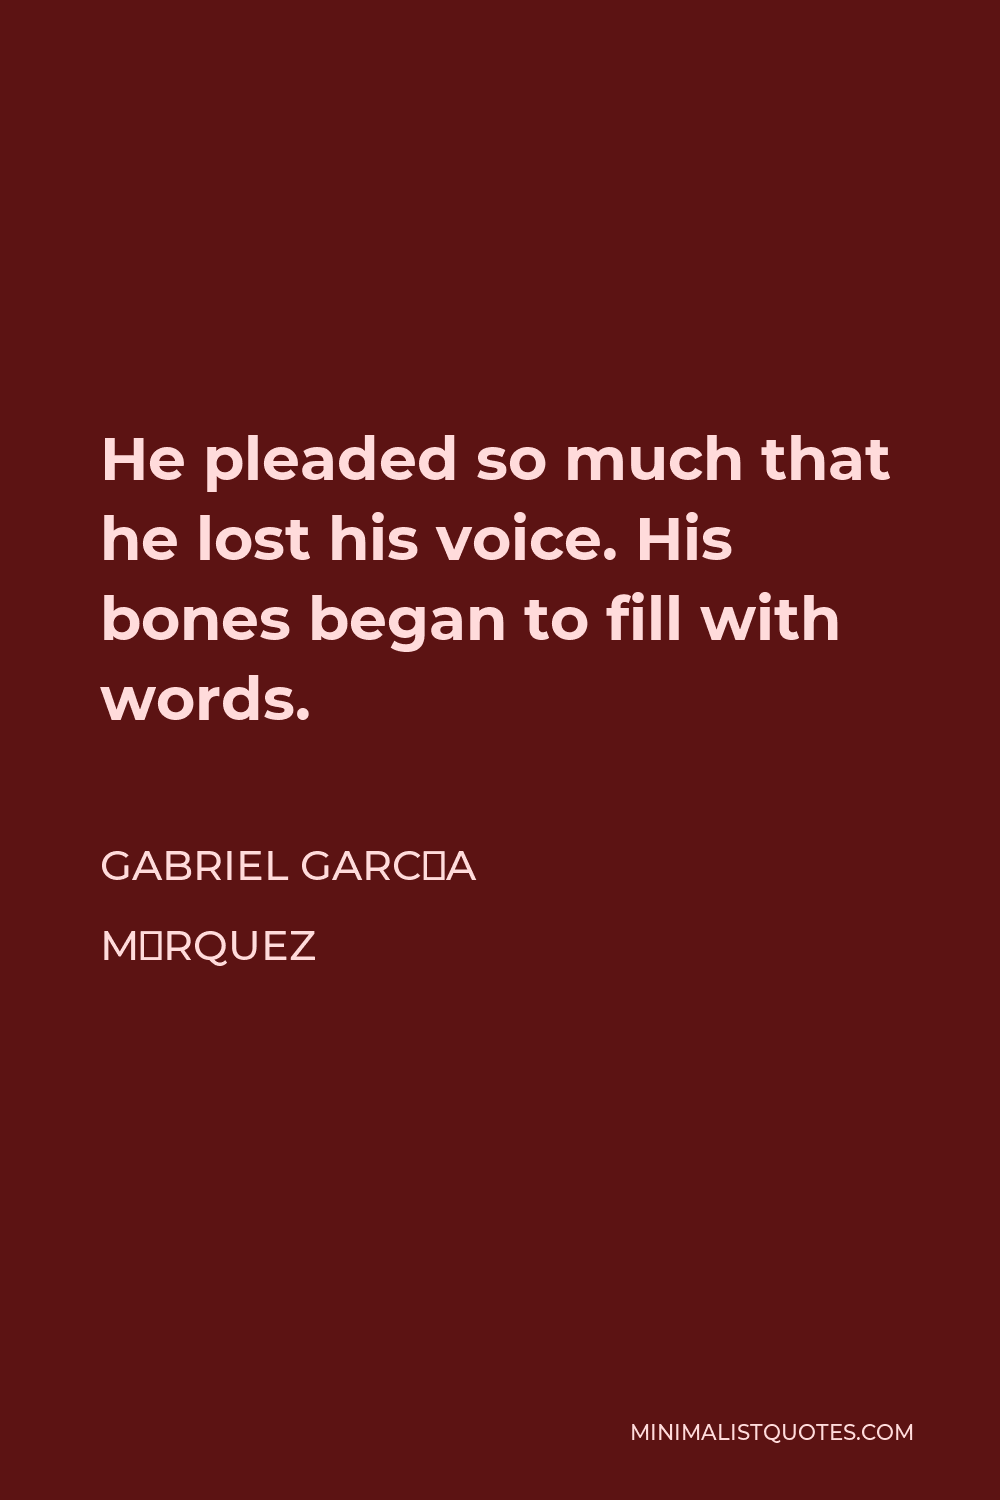 Gabriel García Márquez Quote - He pleaded so much that he lost his voice. His bones began to fill with words.